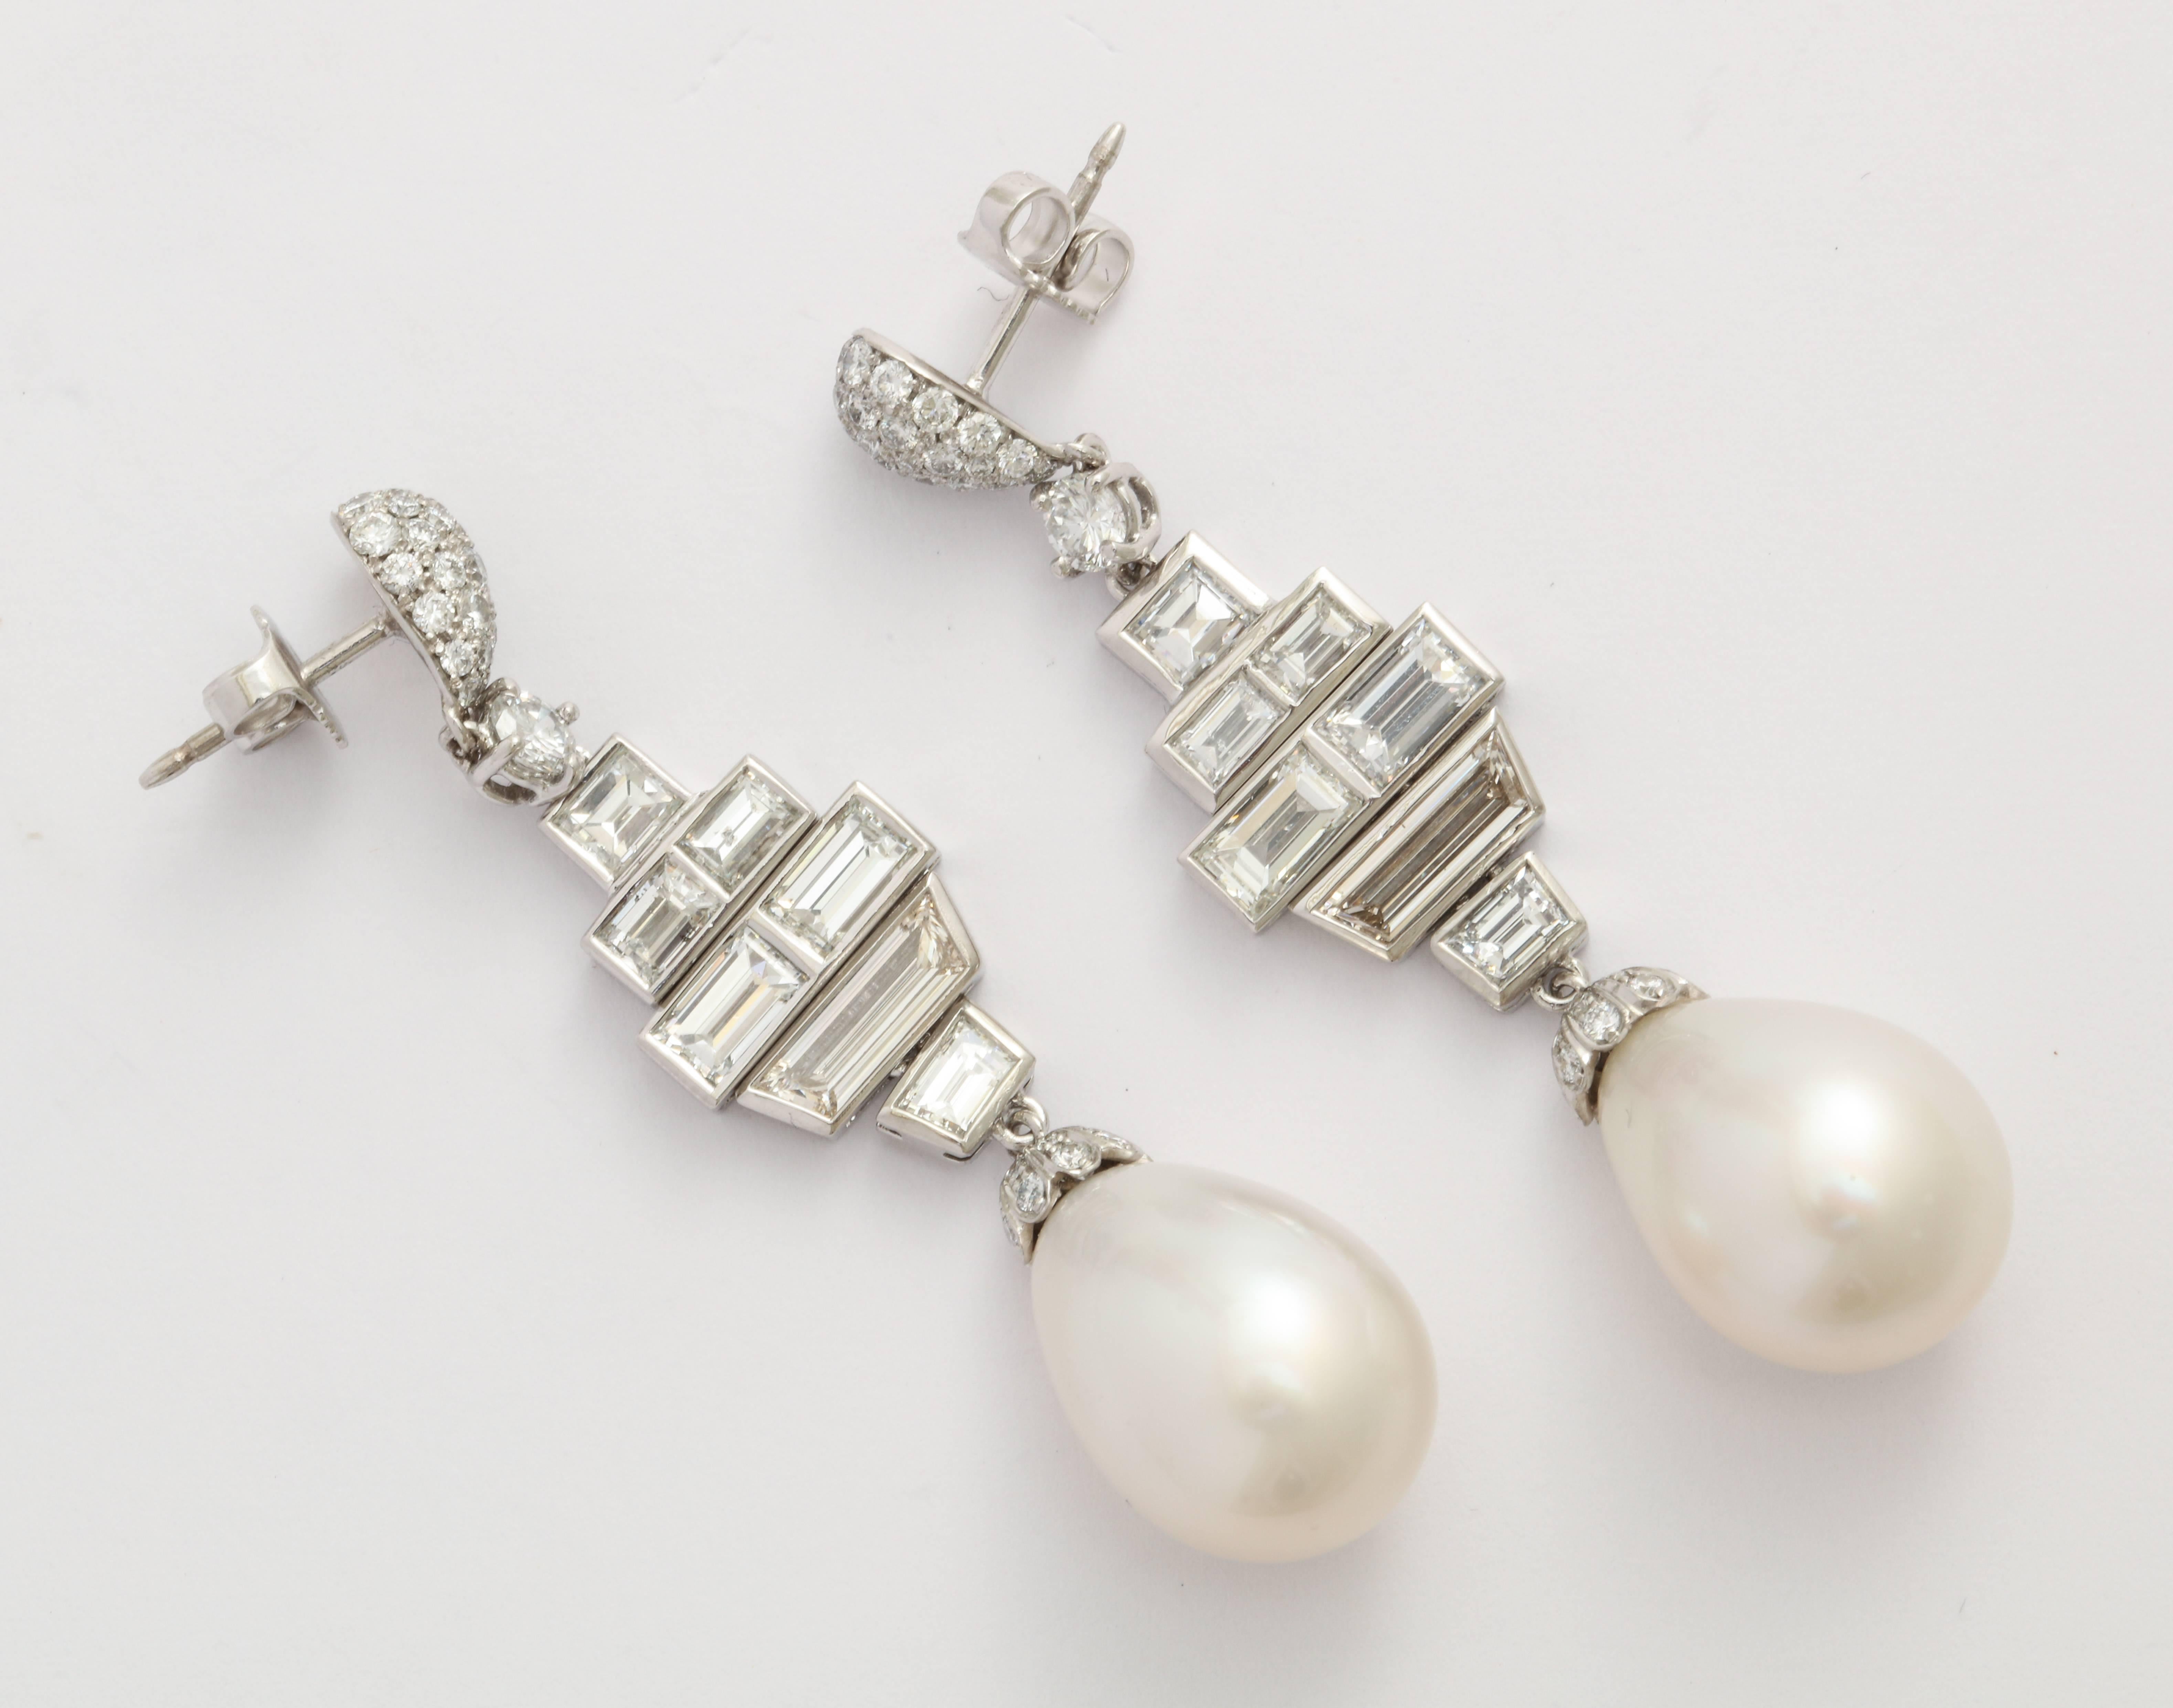 Sensuous silhouette of diamond baguettes and round diamond pave detail helps show off this beautifully shaped, high-luster pair of south sea cultured pearl drops. The total diamond weight is estimated to approximately 4.03 carats.  A fabulous